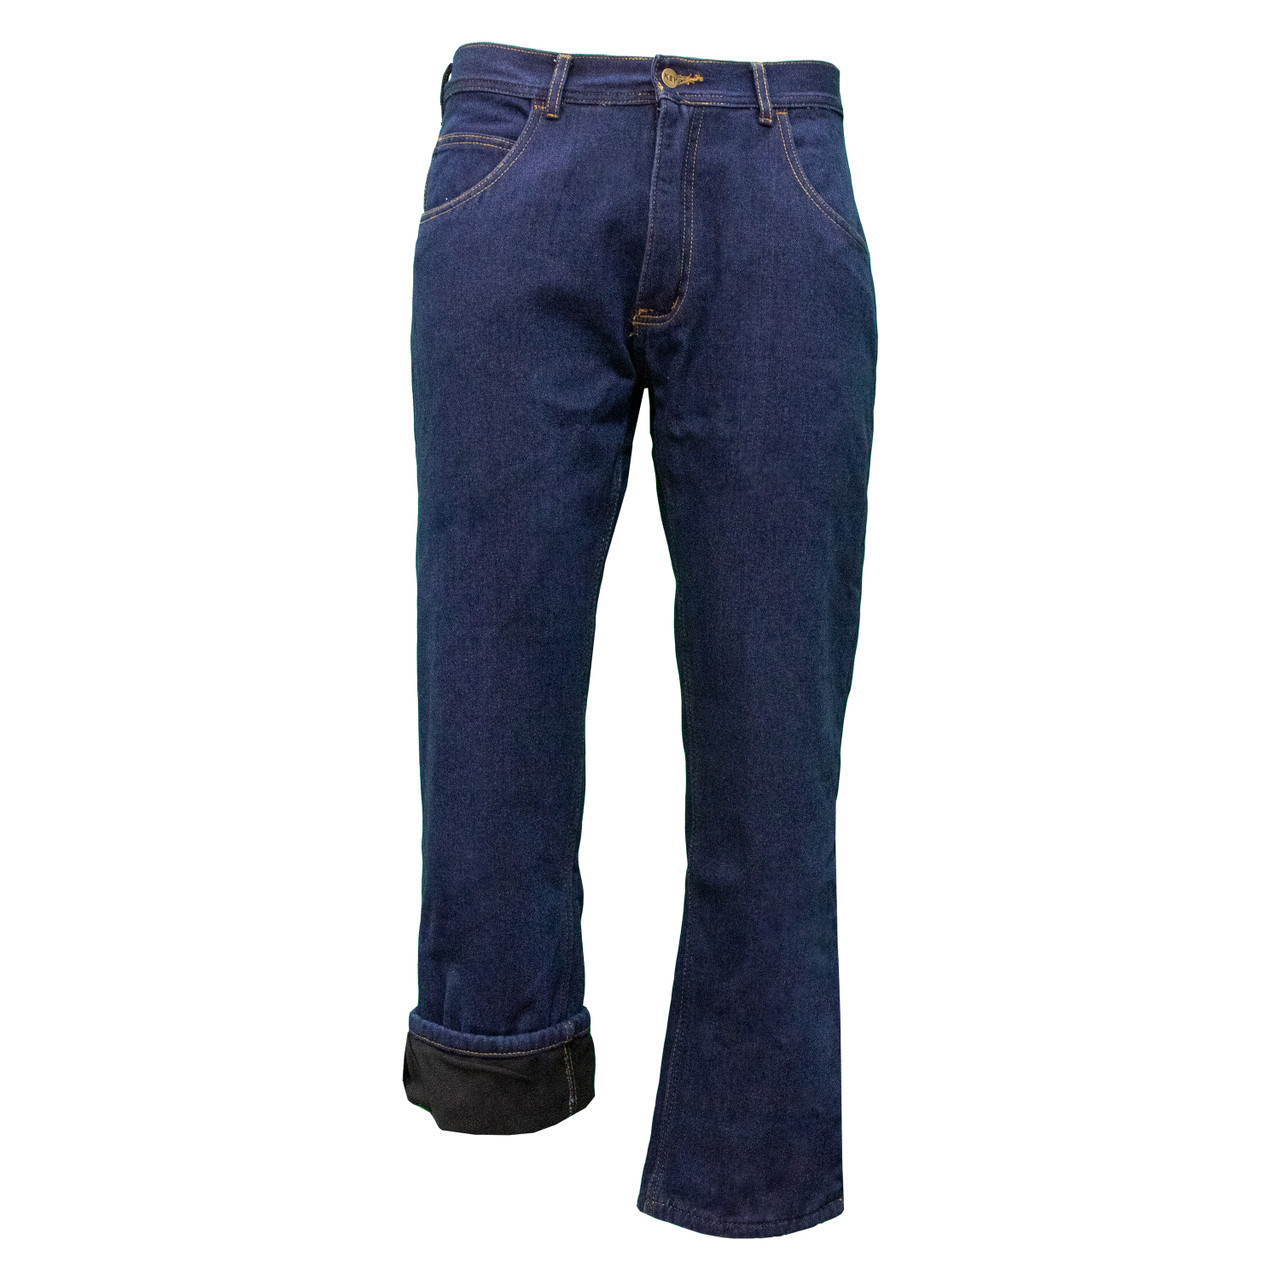 KEY Performance Comfort Fleece Lined Relaxed Fit Jeans